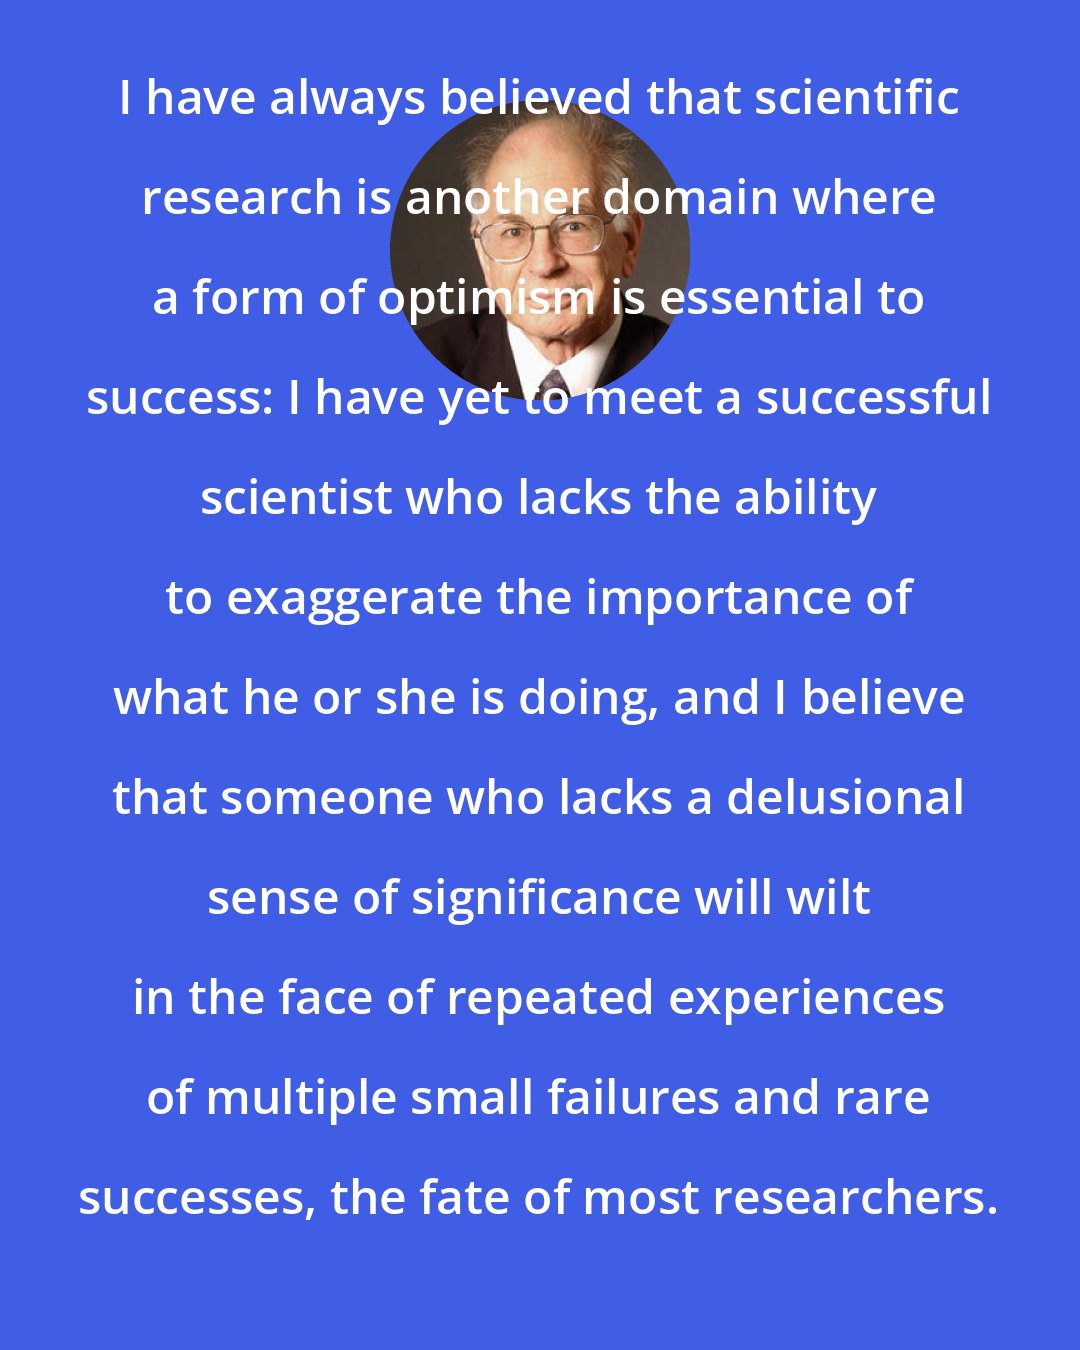 Daniel Kahneman: I have always believed that scientific research is another domain where a form of optimism is essential to success: I have yet to meet a successful scientist who lacks the ability to exaggerate the importance of what he or she is doing, and I believe that someone who lacks a delusional sense of significance will wilt in the face of repeated experiences of multiple small failures and rare successes, the fate of most researchers.